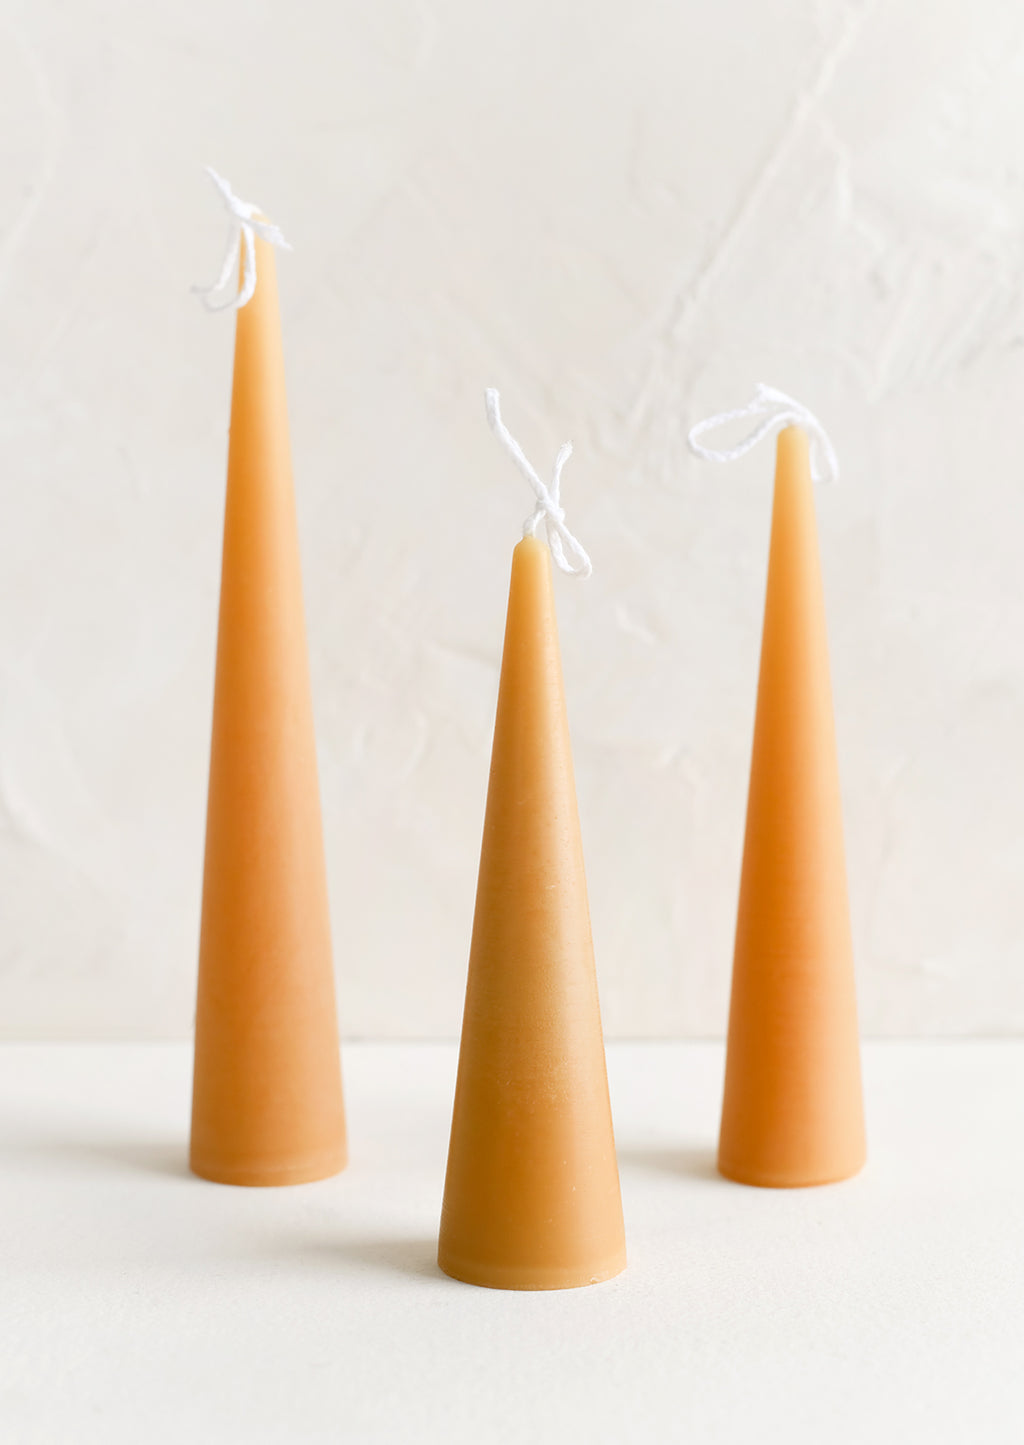 Small / Warm Sand: Three lit cone-shaped taper candles in warm sand.